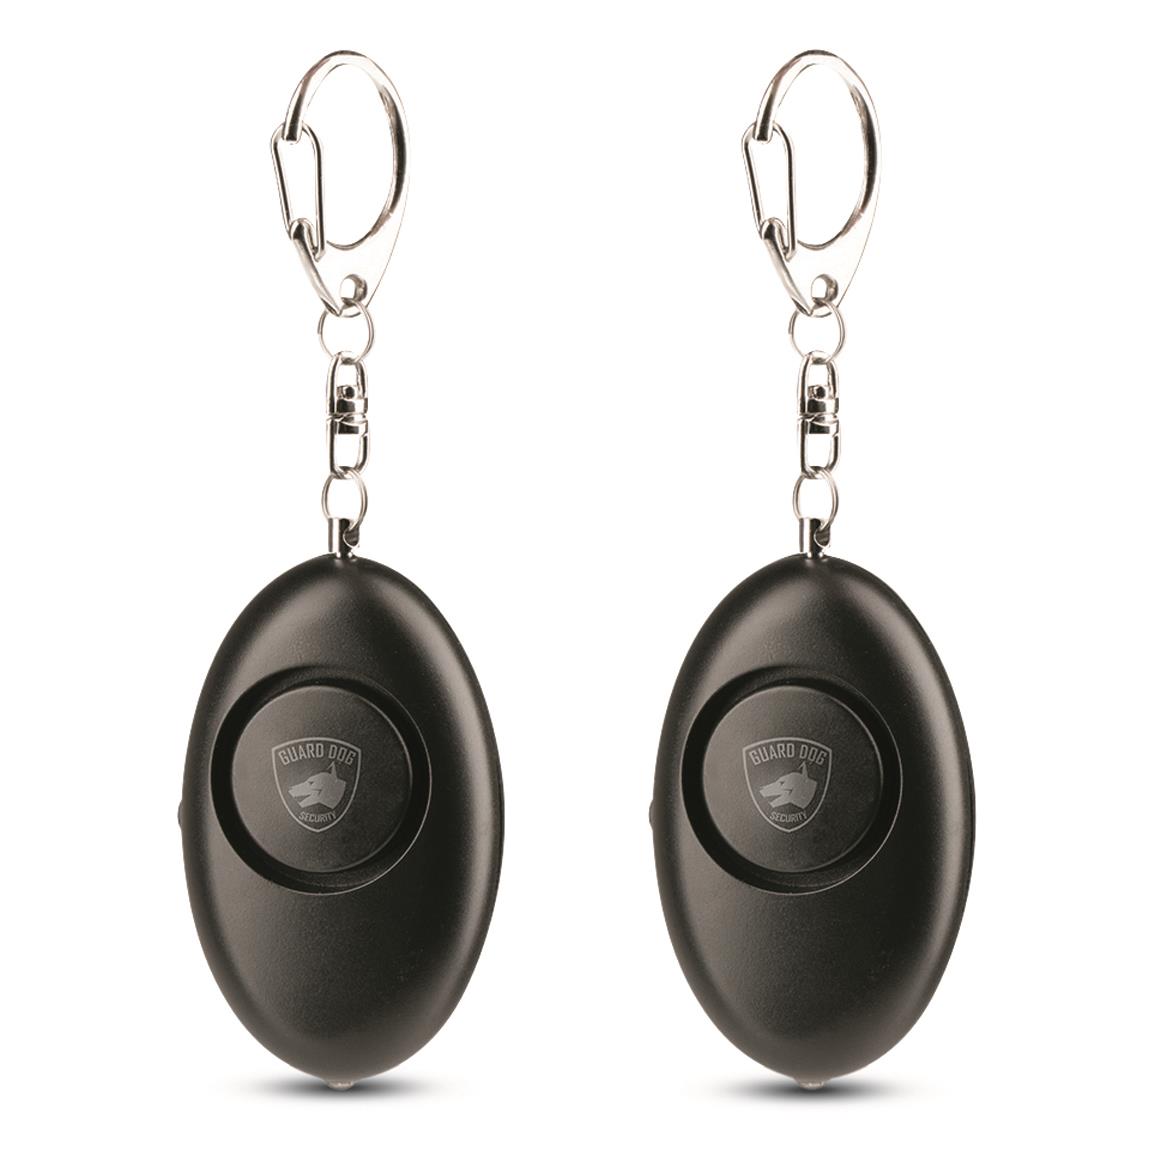 Guard Dog Personal Security Alarm, 2 Pack, Black